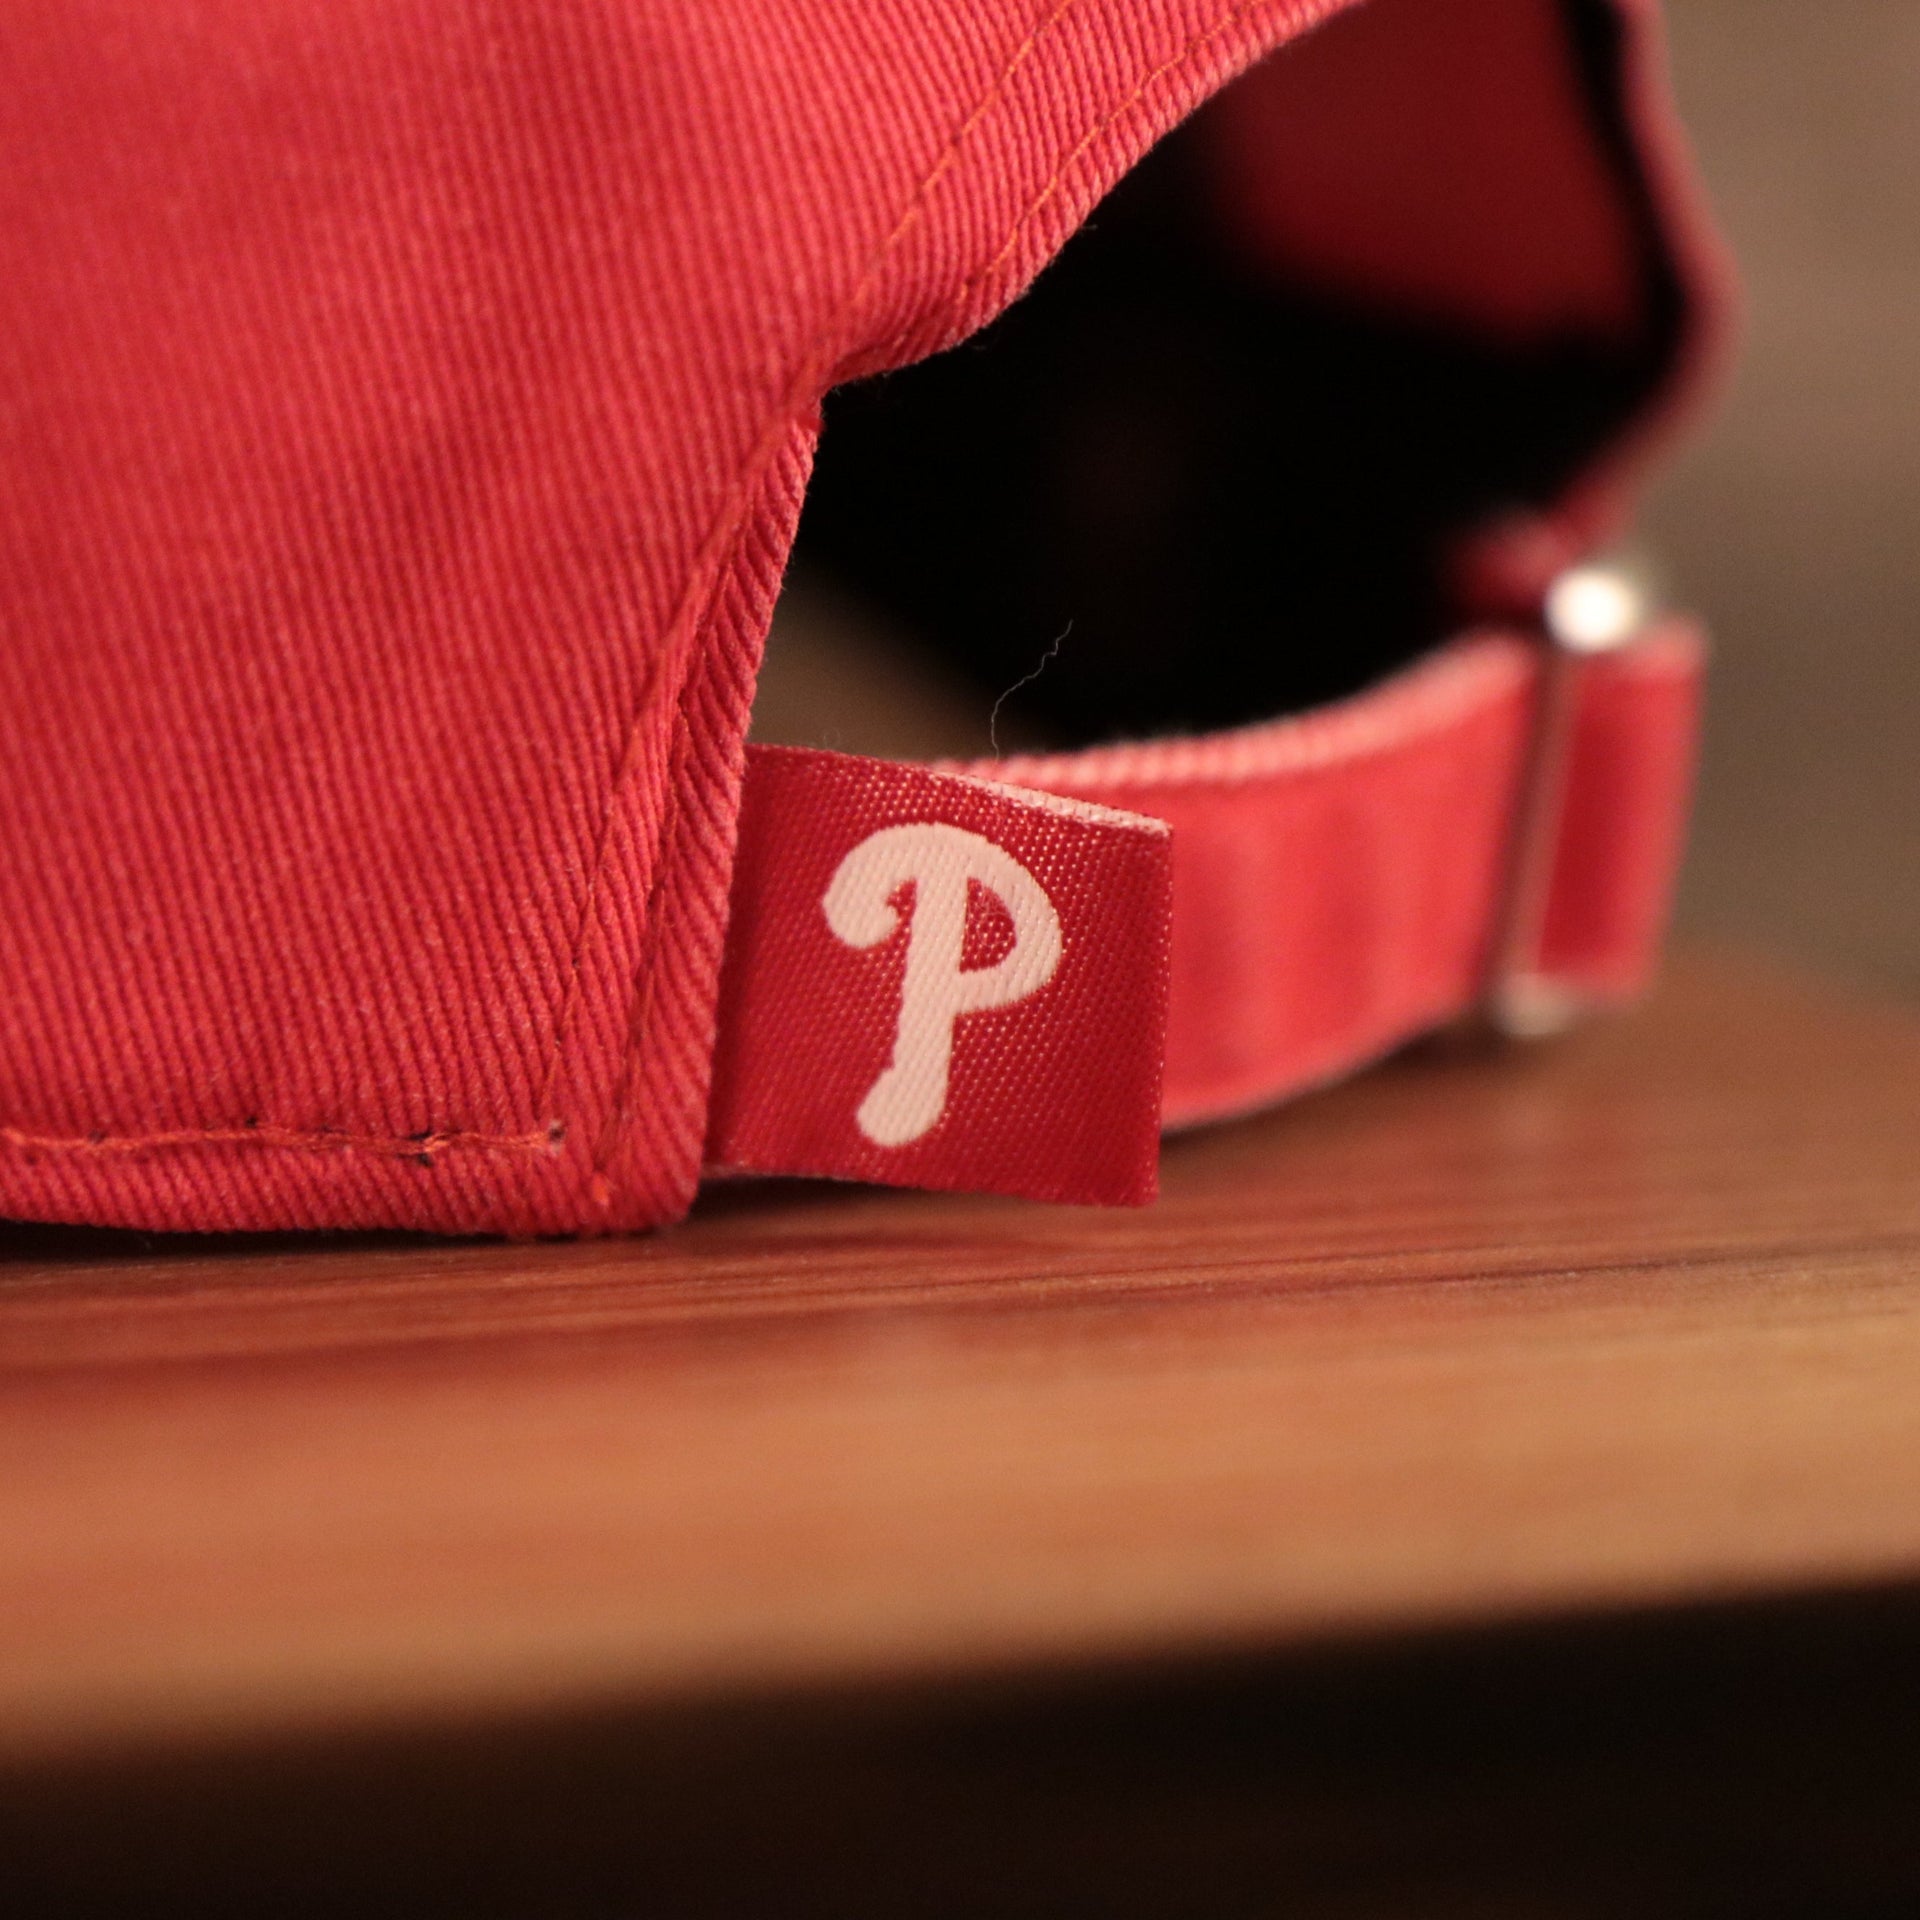 The Phillies strap on the backside of the New Era washed pink womens 920 baseball cap.